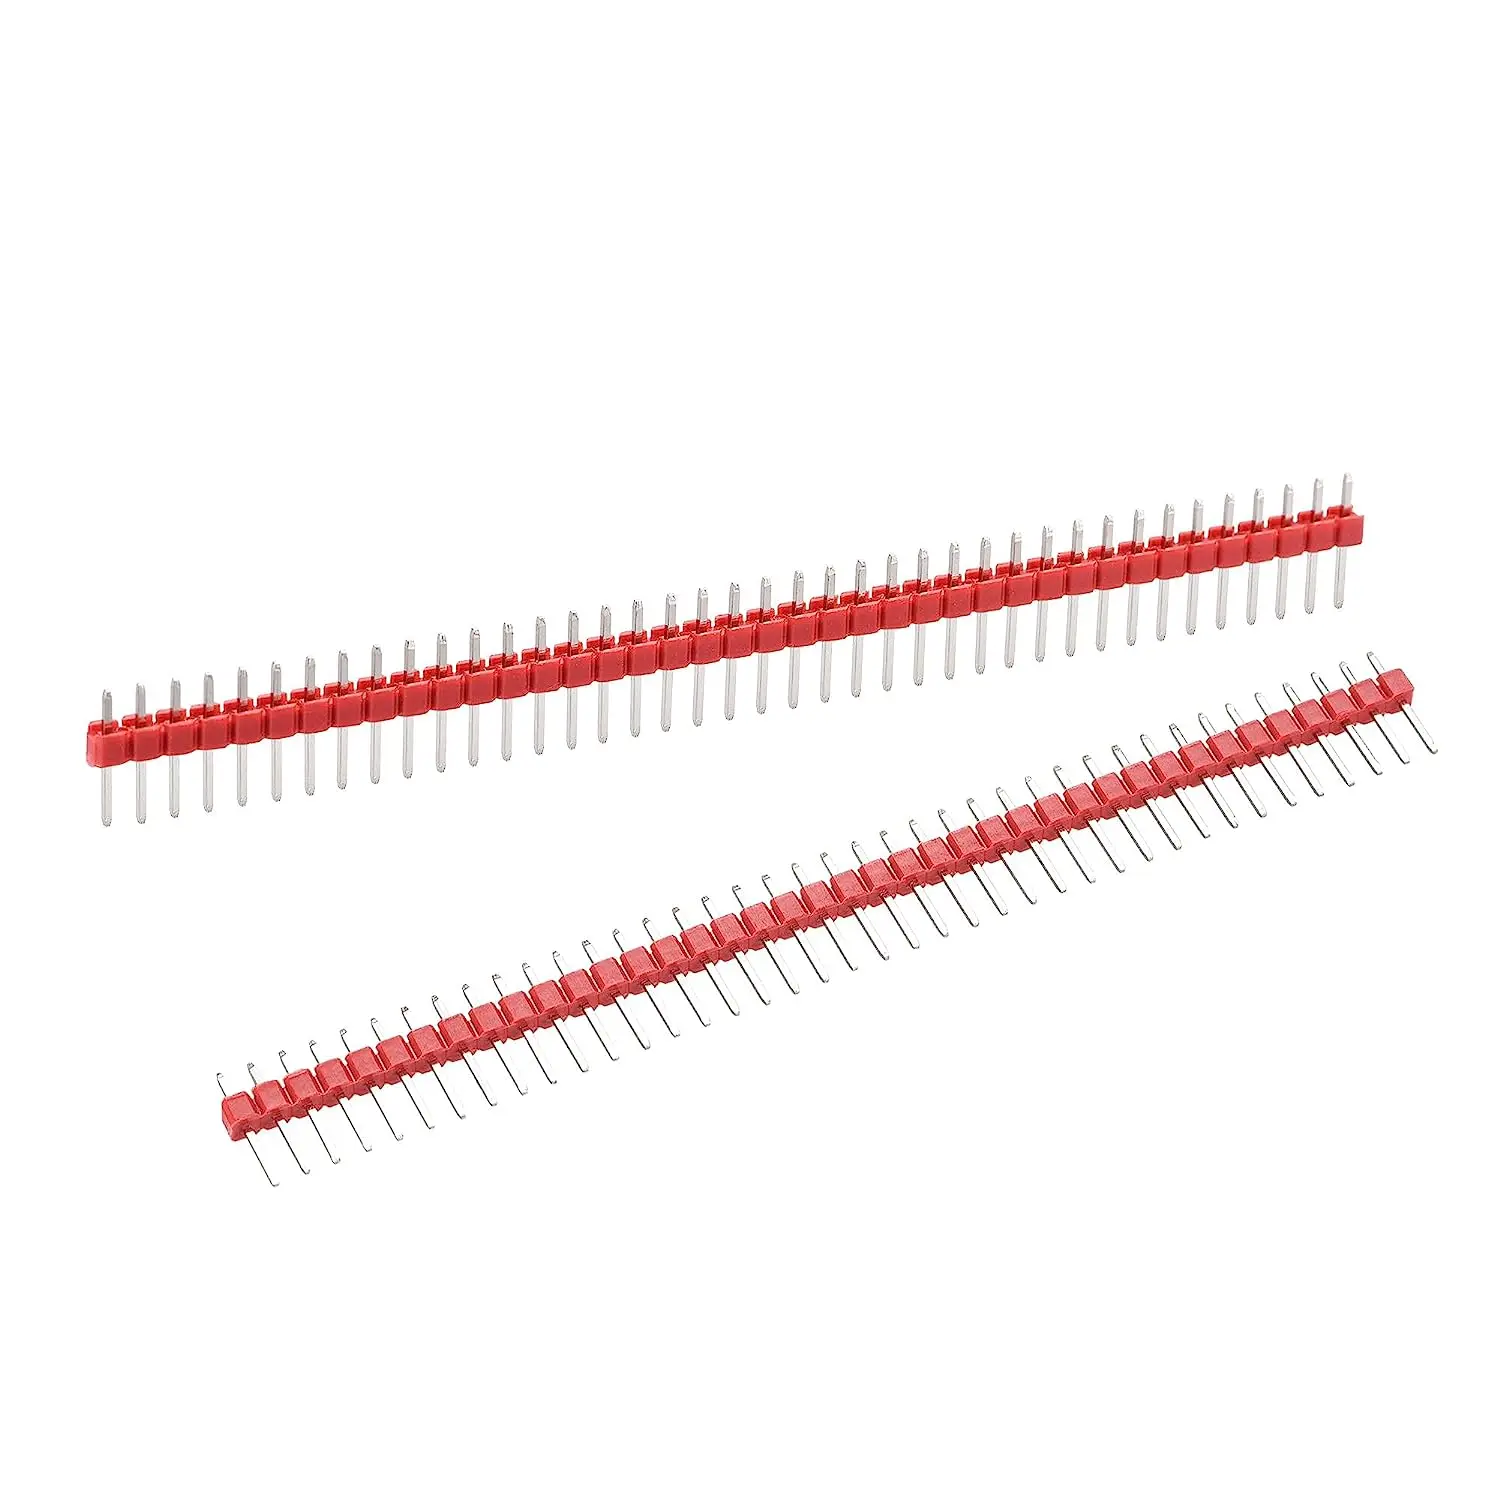 

Keszoox 10pcs Male Pin Header,40 Pin 2.54mm Straight Single Row Breakable Header Connector PCB Pin Strip,Red